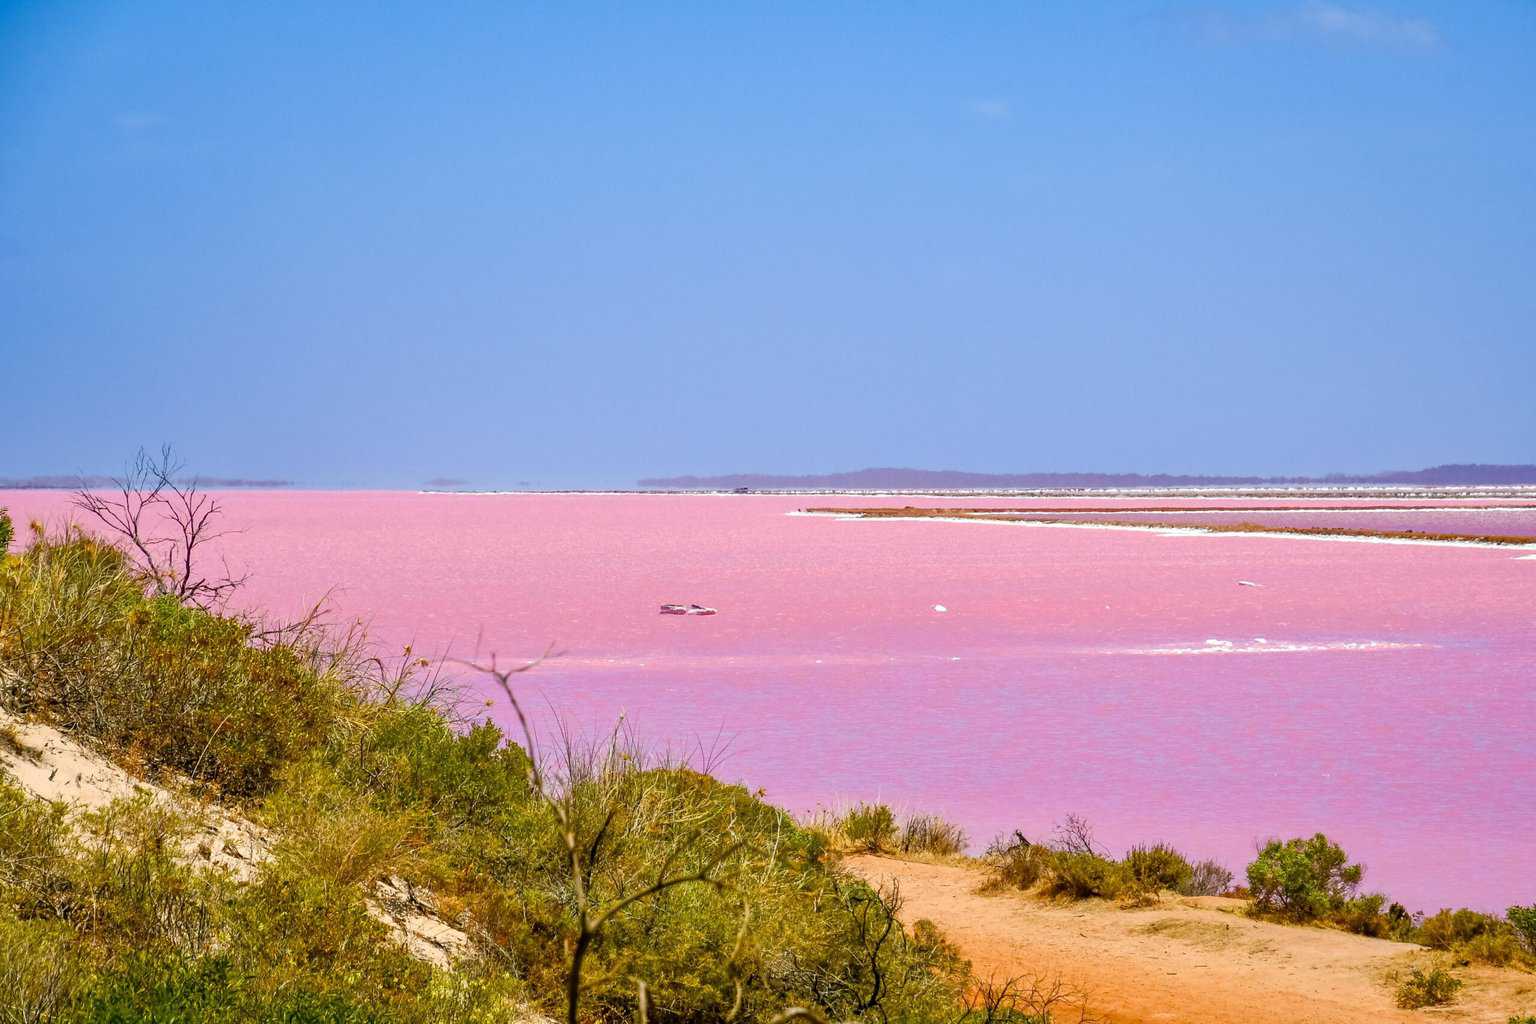 Lake Hillier min scaled The Natural Wonders of the World are all incredible sights to behold in many parts of the world. All these places attract many tourists throughout the year. A global poll was made by the Seven Natural Wonders organization in 1997 and contained seven natural wonders, which are the Northern Lights, the Grand Canyon, Paricutin, Mount Everest, Harbor of Rio de Janeiro, Victoria Falls, and the Great Barrier Reef and there are much more but these are the most famous and the most admired across the globe.